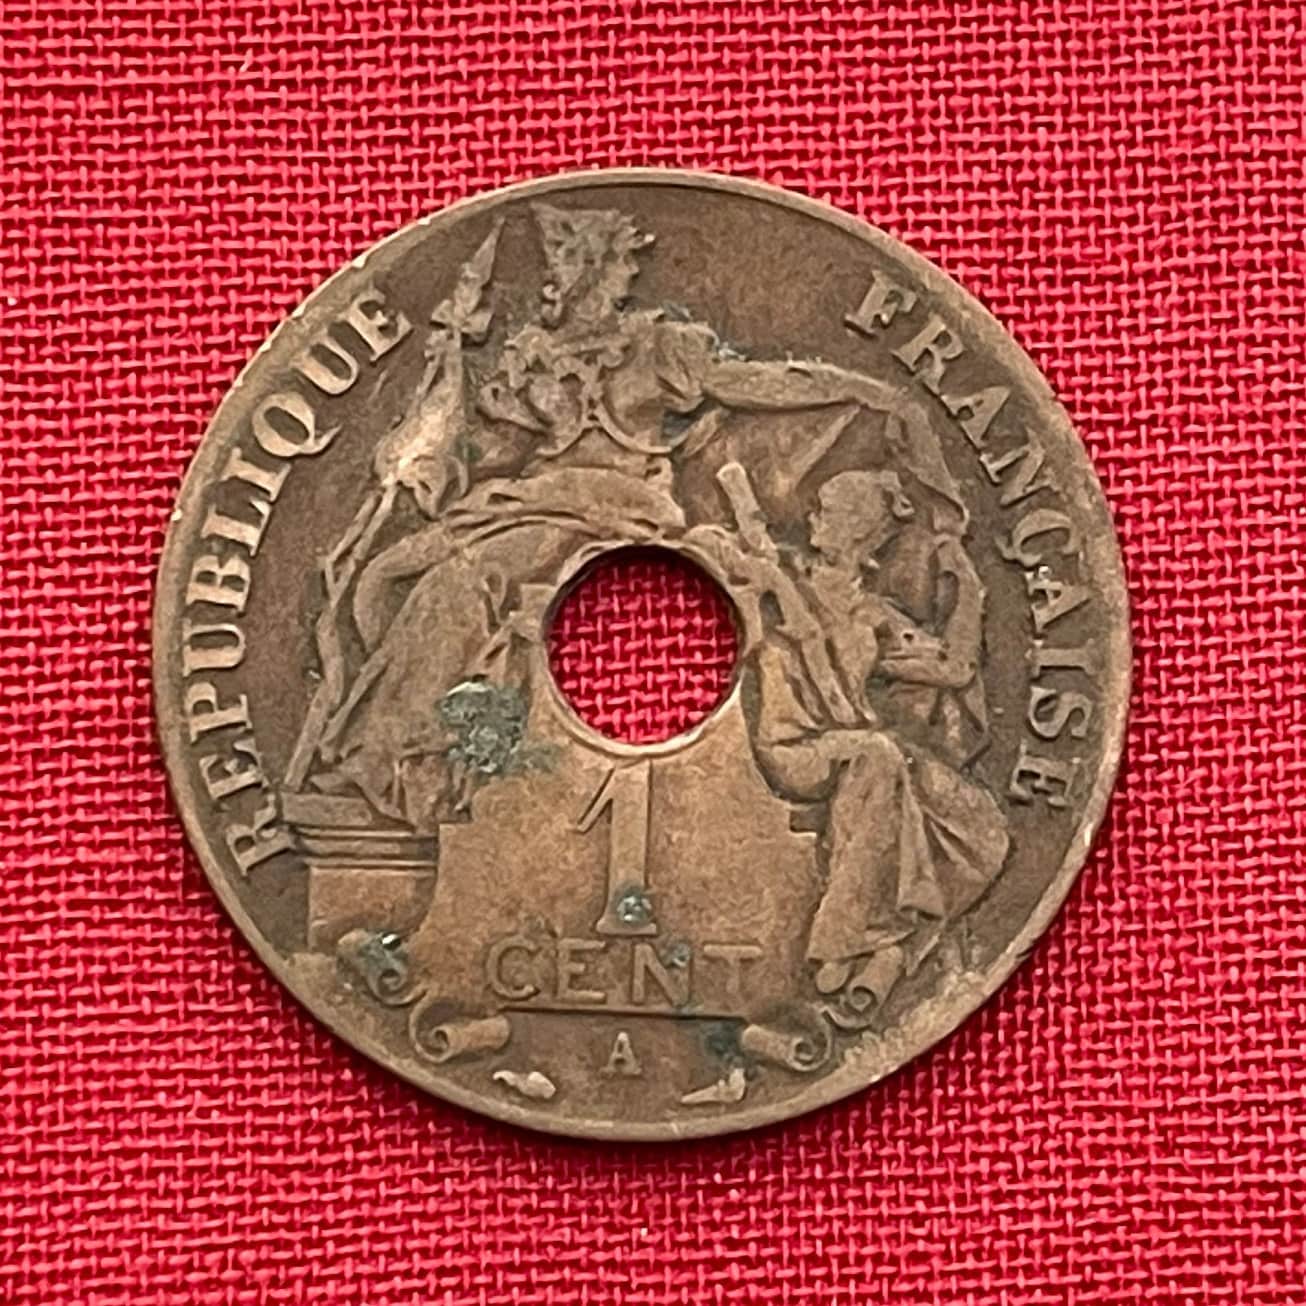 Imperialist Marianne 1 Cent French Indochina Authentic Coin Money for Jewelry (Vietnam) (Phrygian Cap) (Hole in Coin) (Chinese Characters)